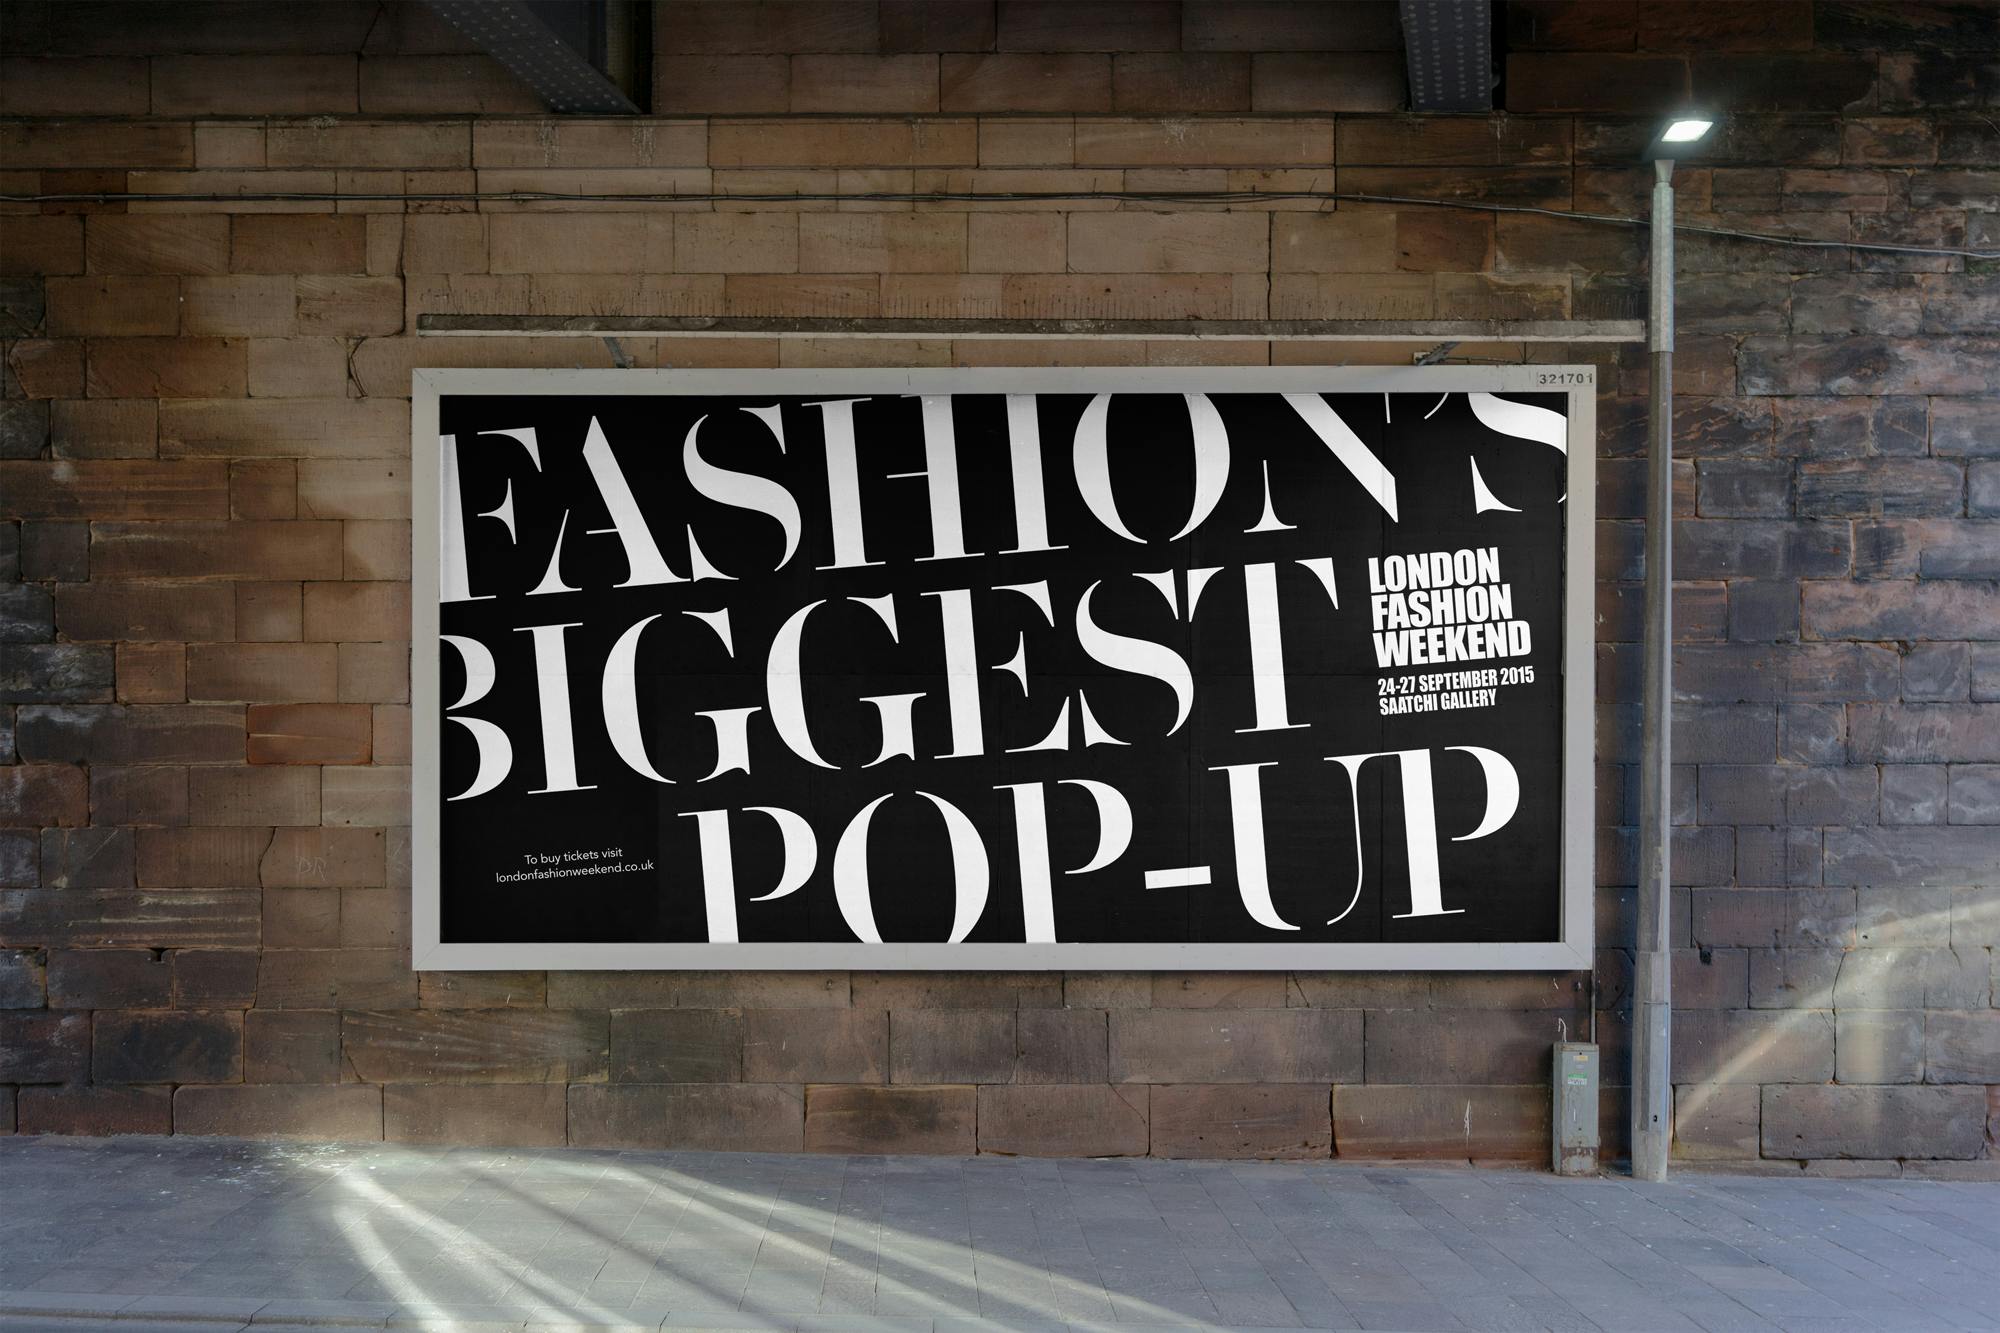 London Fashion Weekend Identity designed by Extract Studio